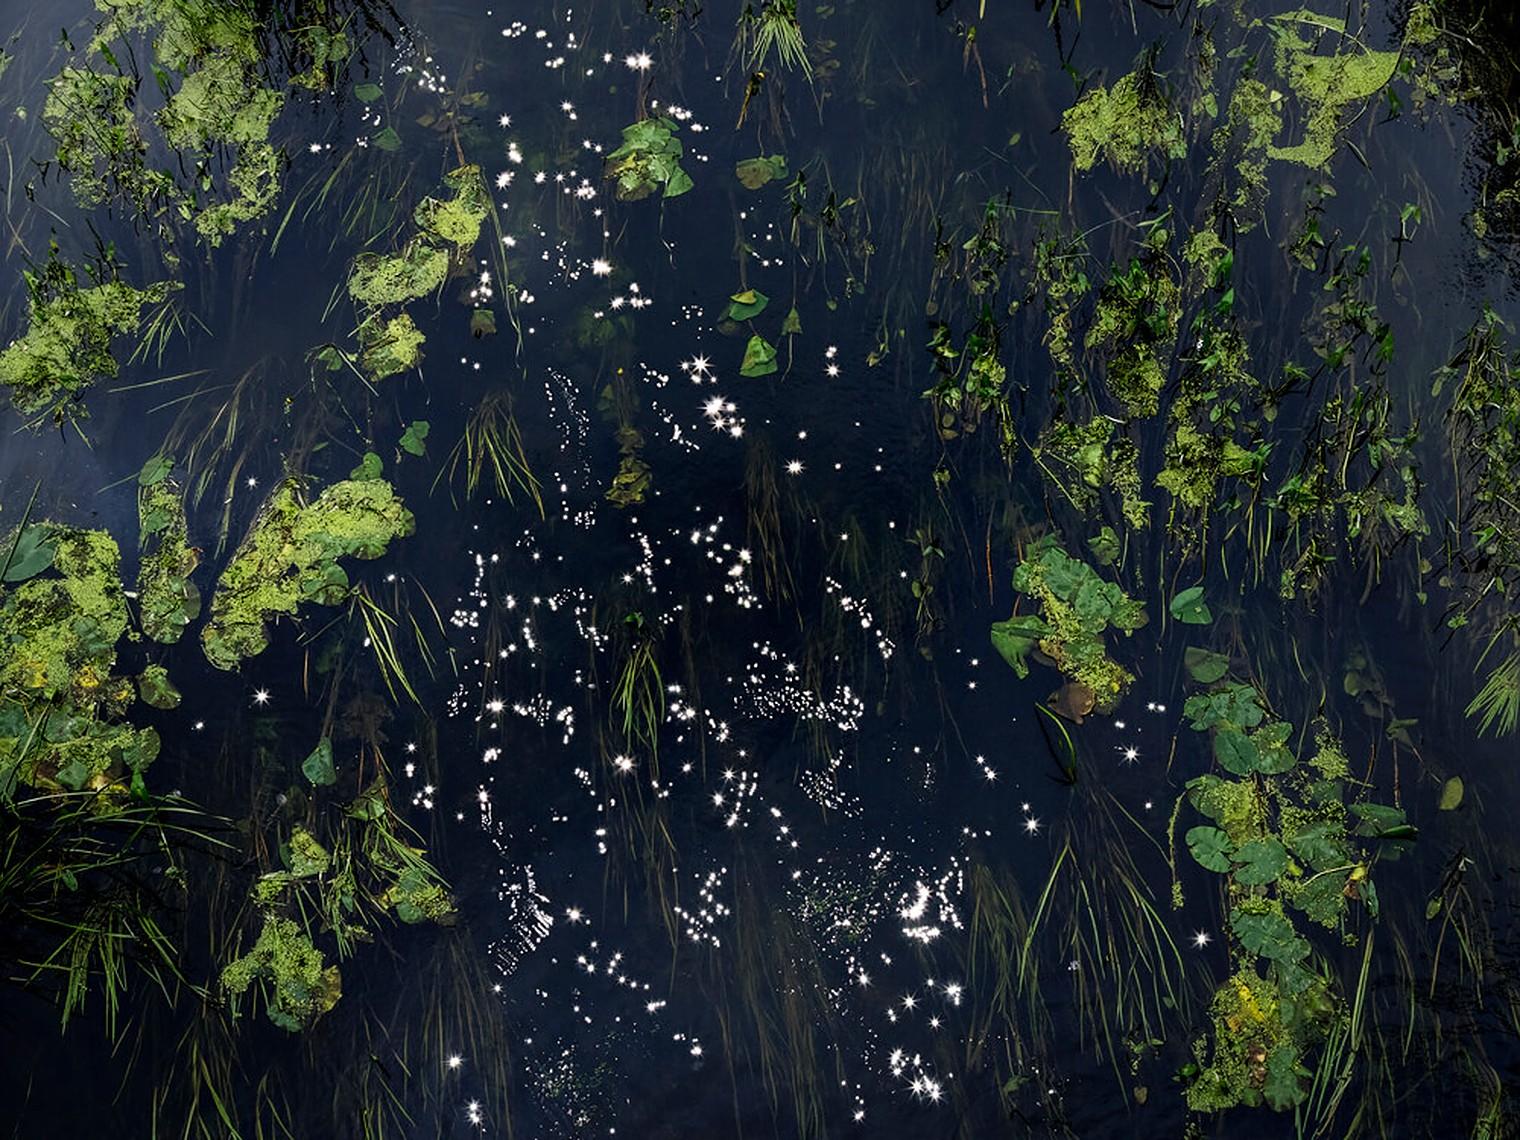 All prints are produced to order and lead times are expected between 15-20 days.

Chalk Streams 3 is a stunning C-Type Print on Fuji Crystal Archive Paper in Maxima Matte. This size print is available in an Edition of 7 + 2 Artist Proofs.

In her